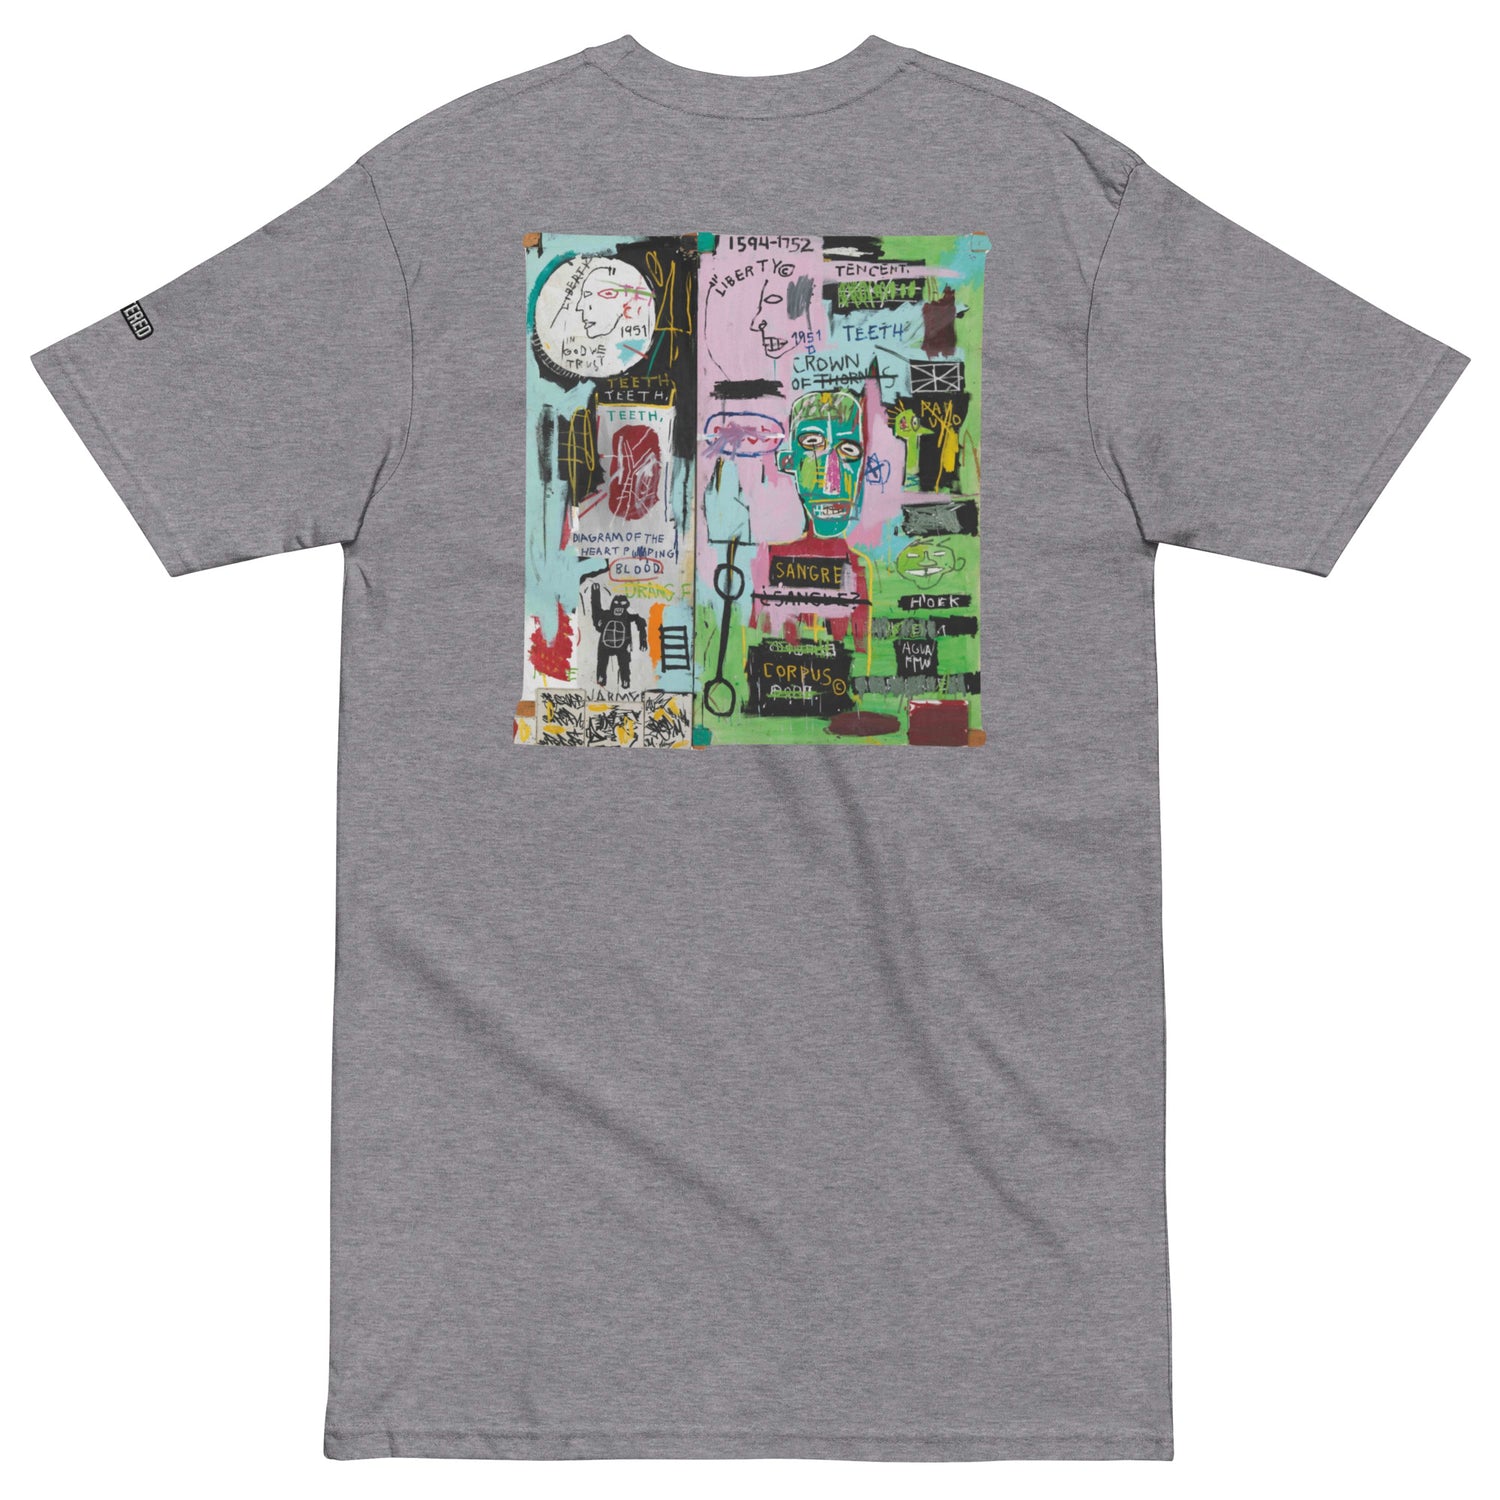 Jean-Michel Basquiat "In Italian" Artwork Embroidered and Printed Premium Grey Streetwear T-Shirt Scattered